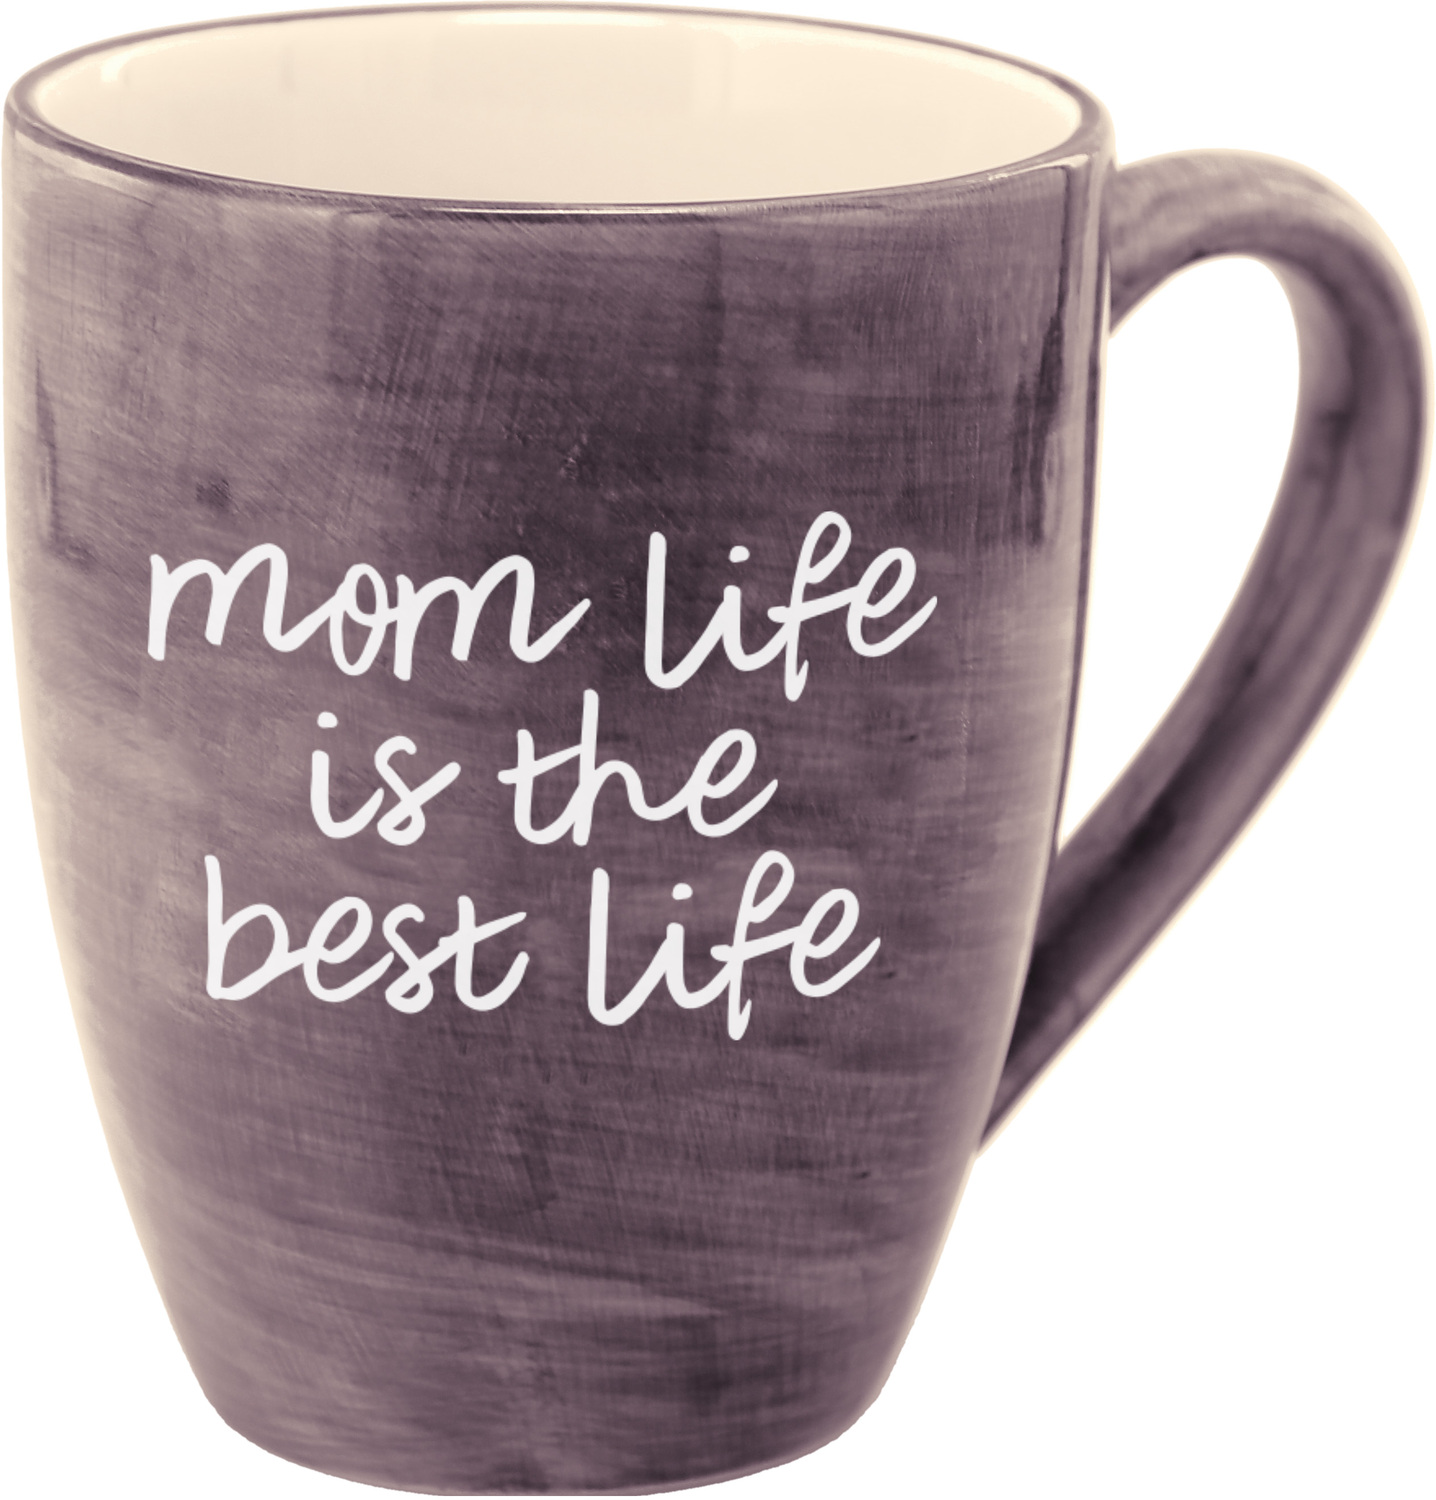 Best Life by Mom Life - Best Life - 20 oz Cup